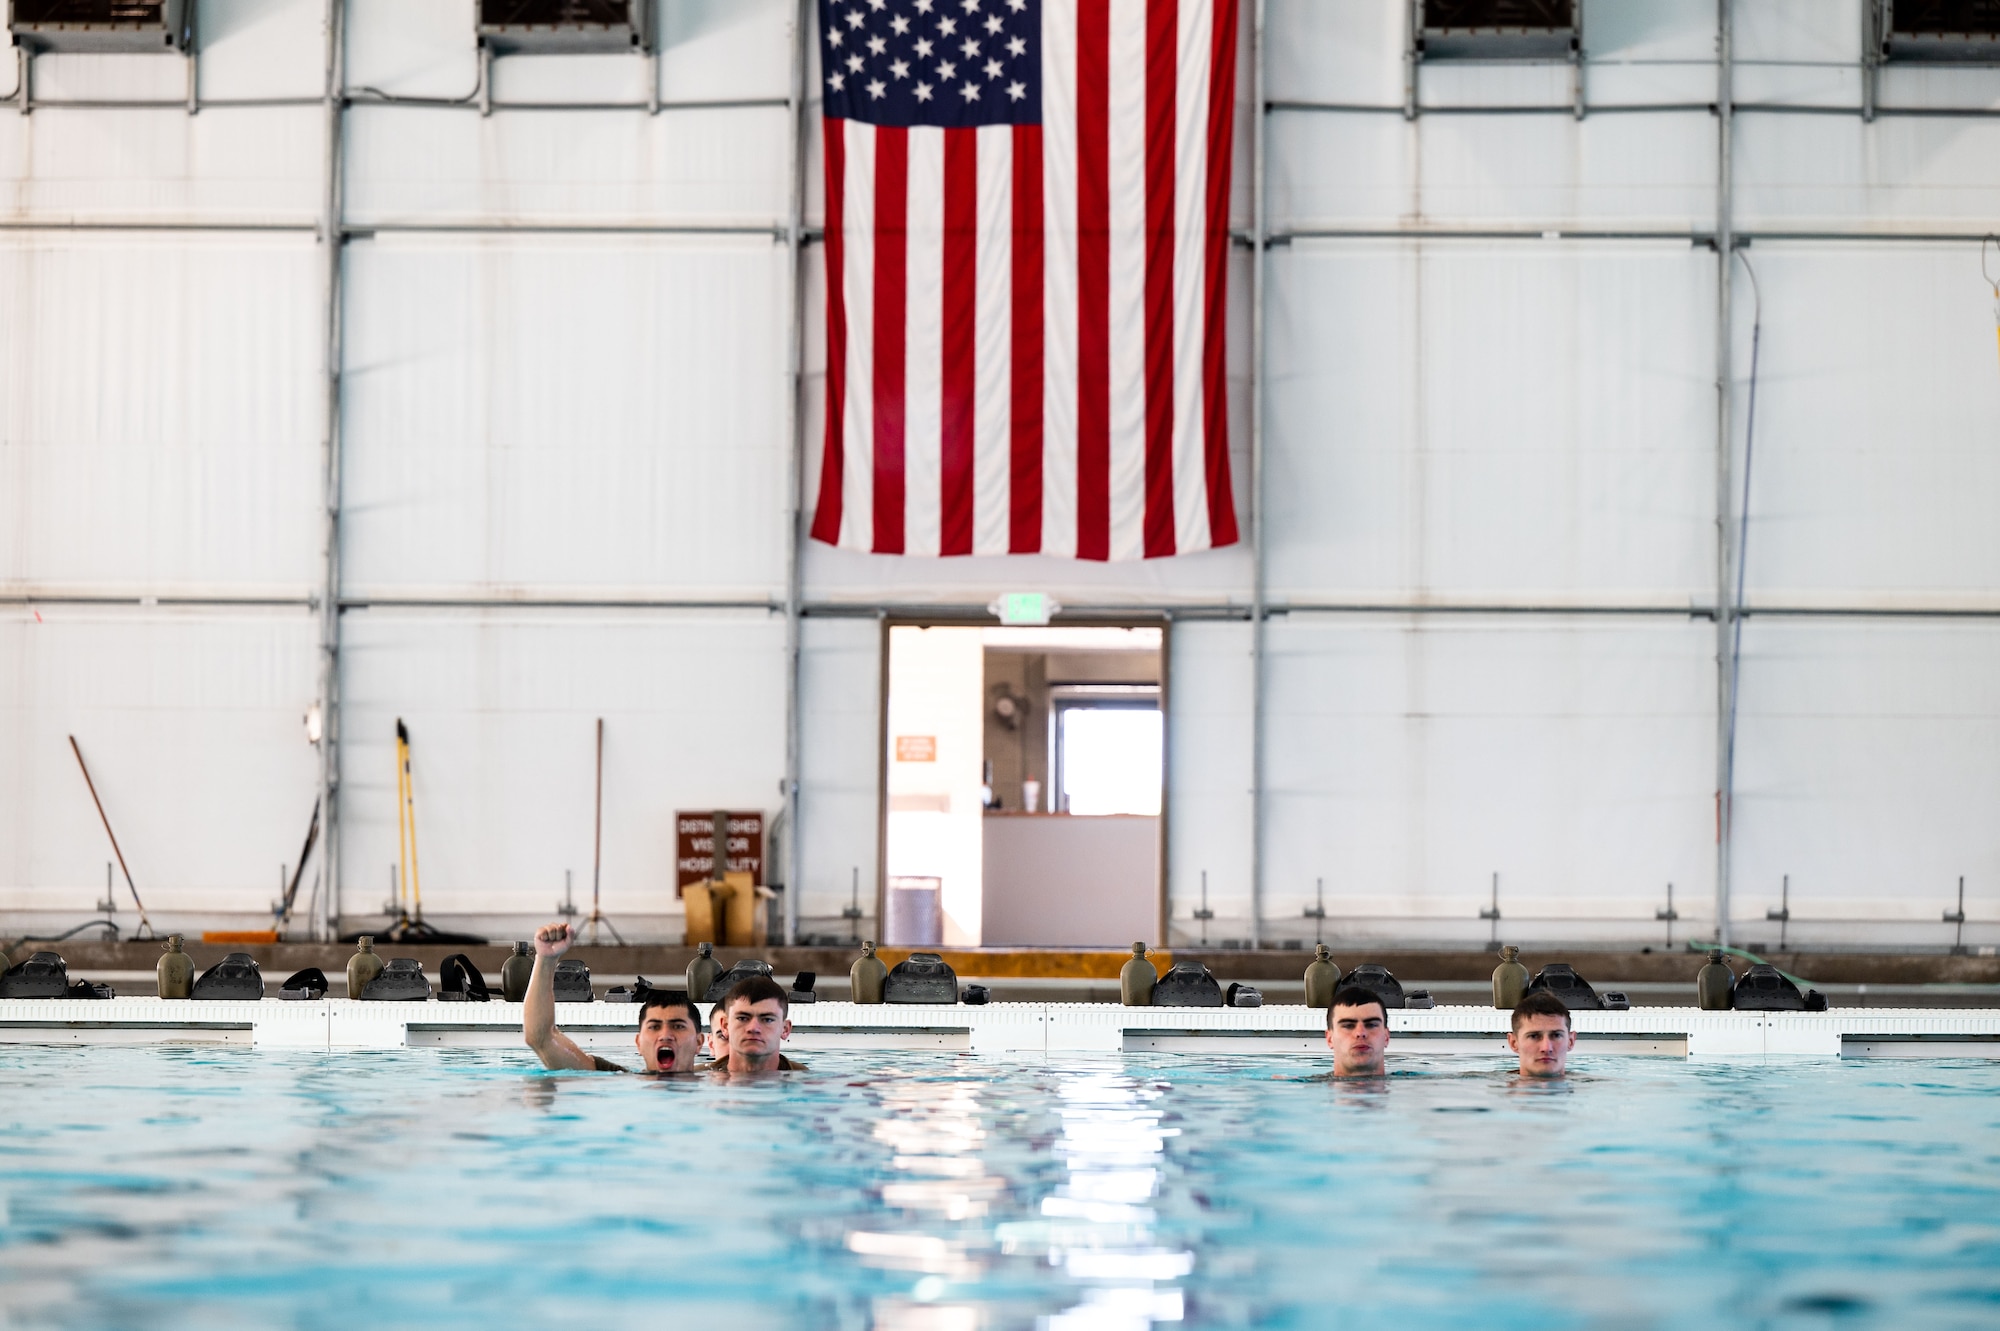 trainees line up in the pool with American flag in the background. One trainee yells and lifts his hand to show he's ready to dive